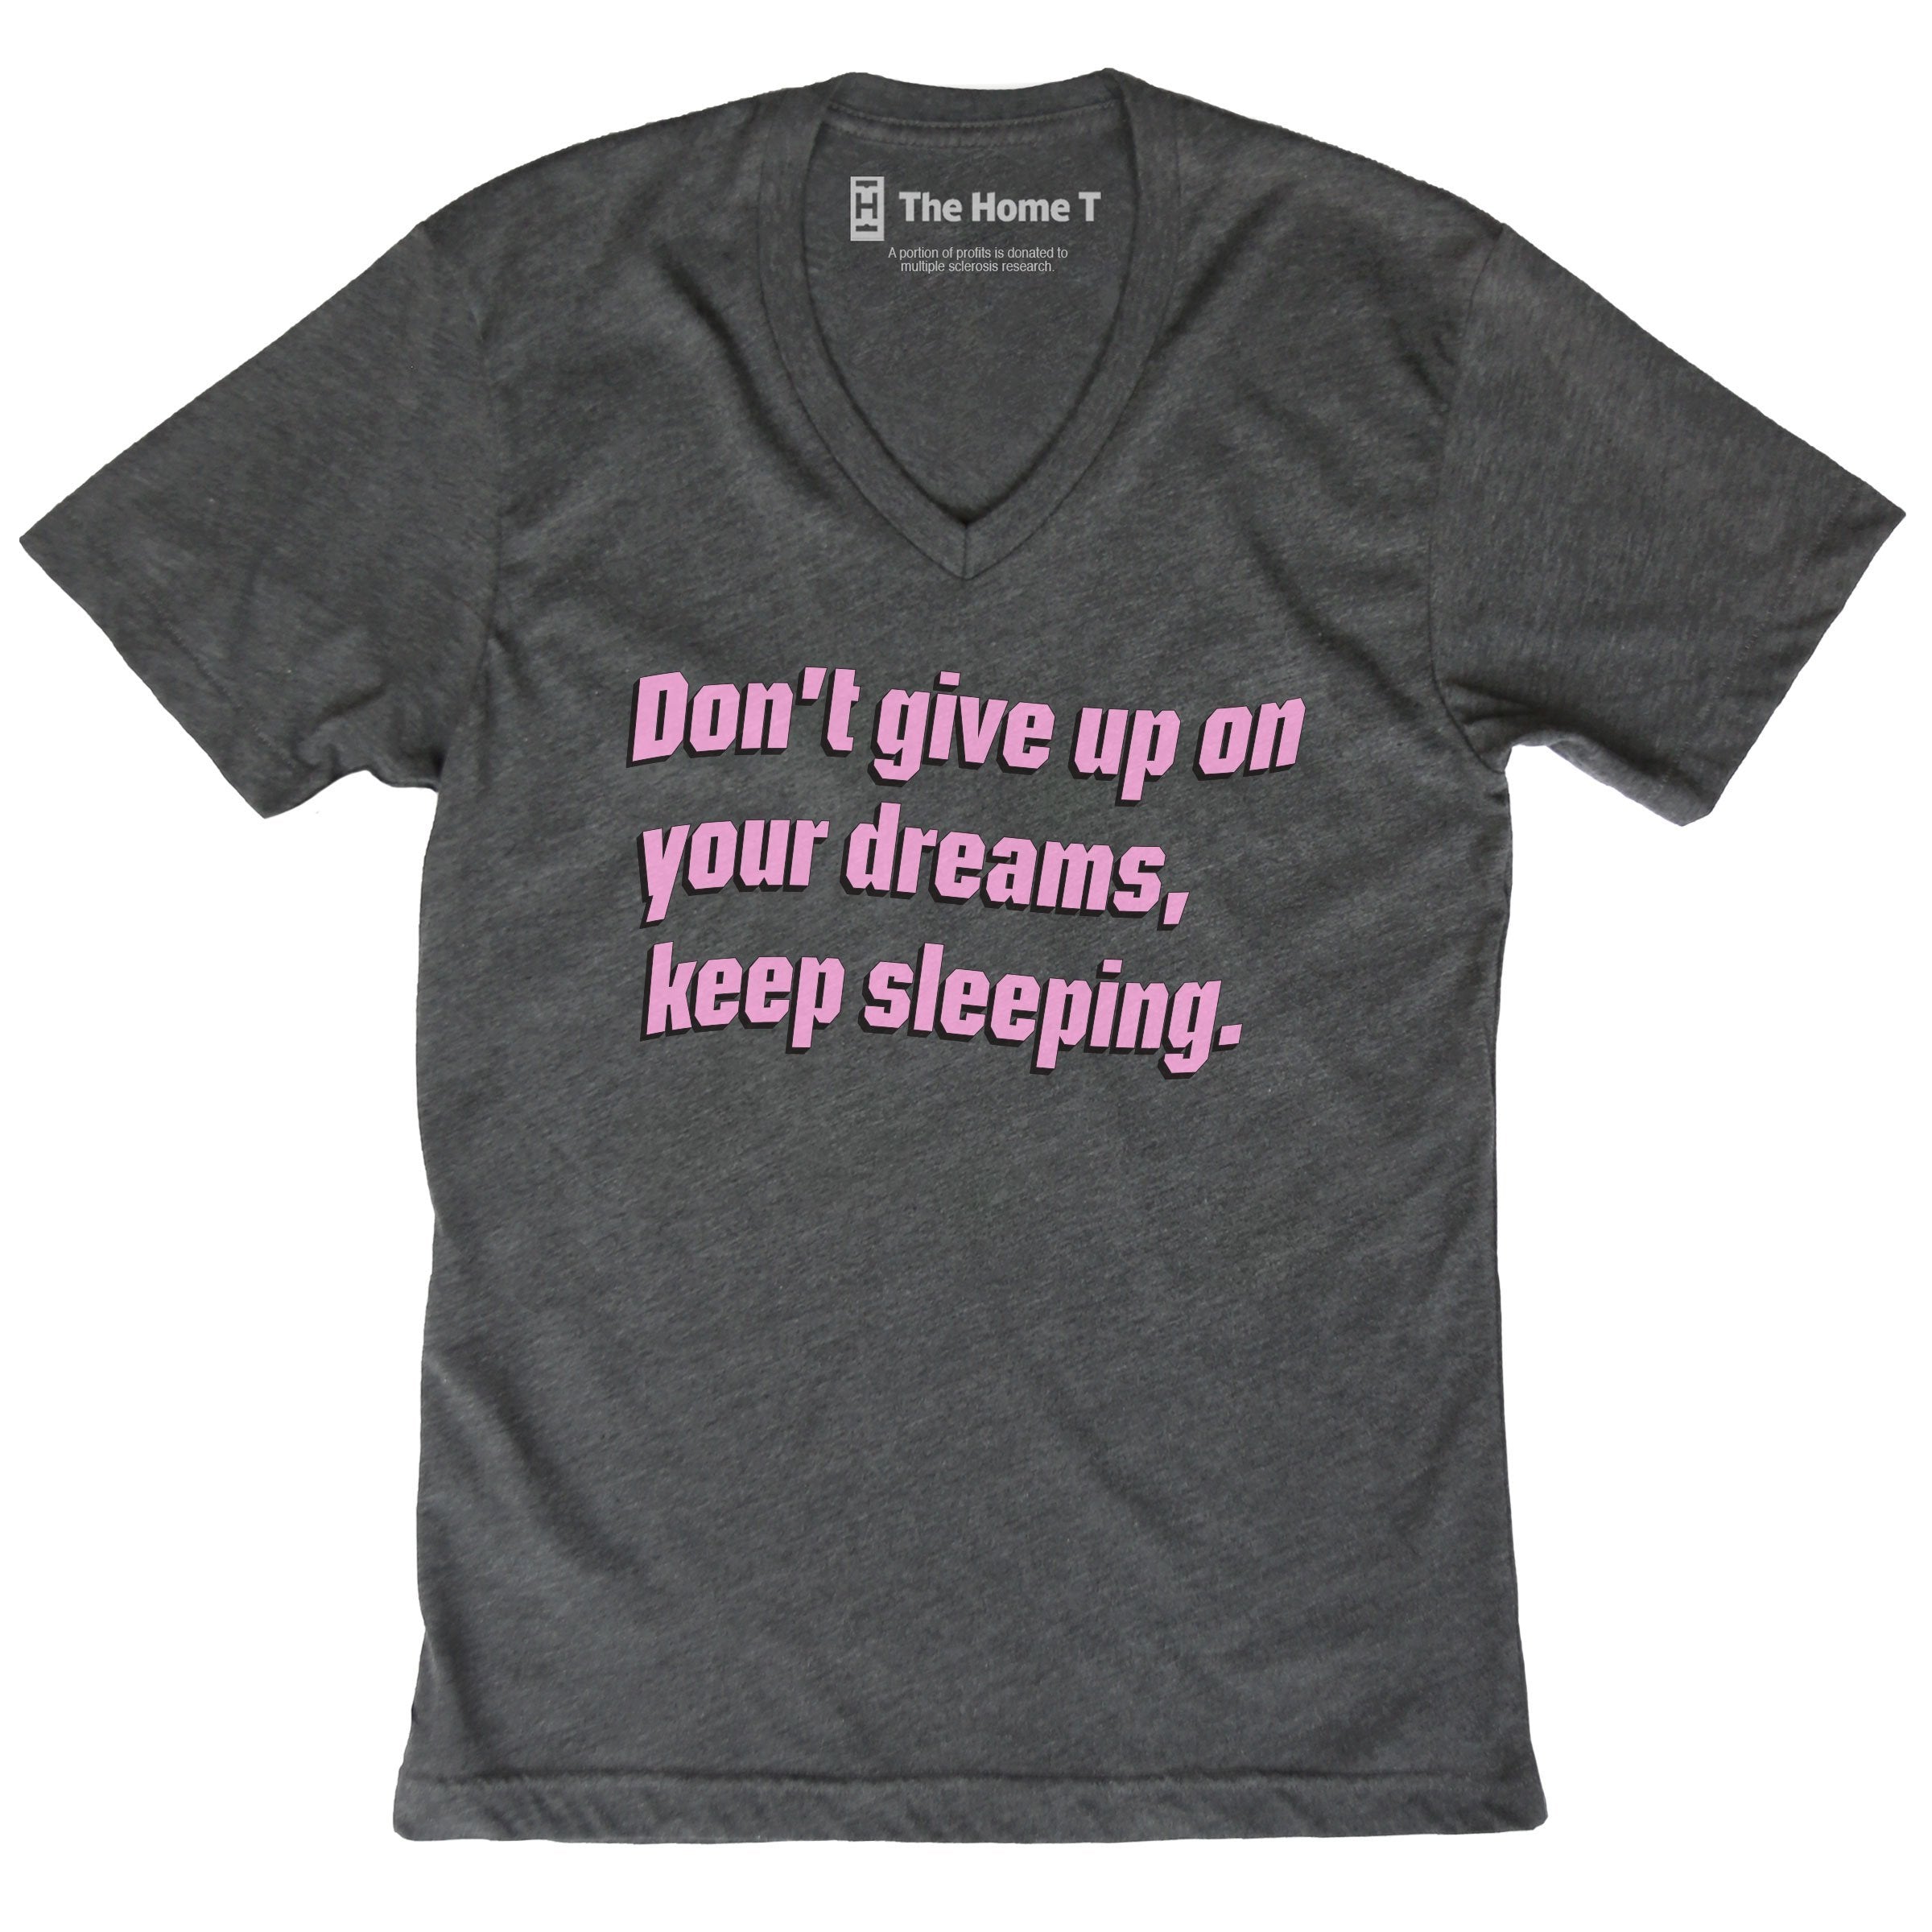 Keep Sleeping The Home T XS V-Neck